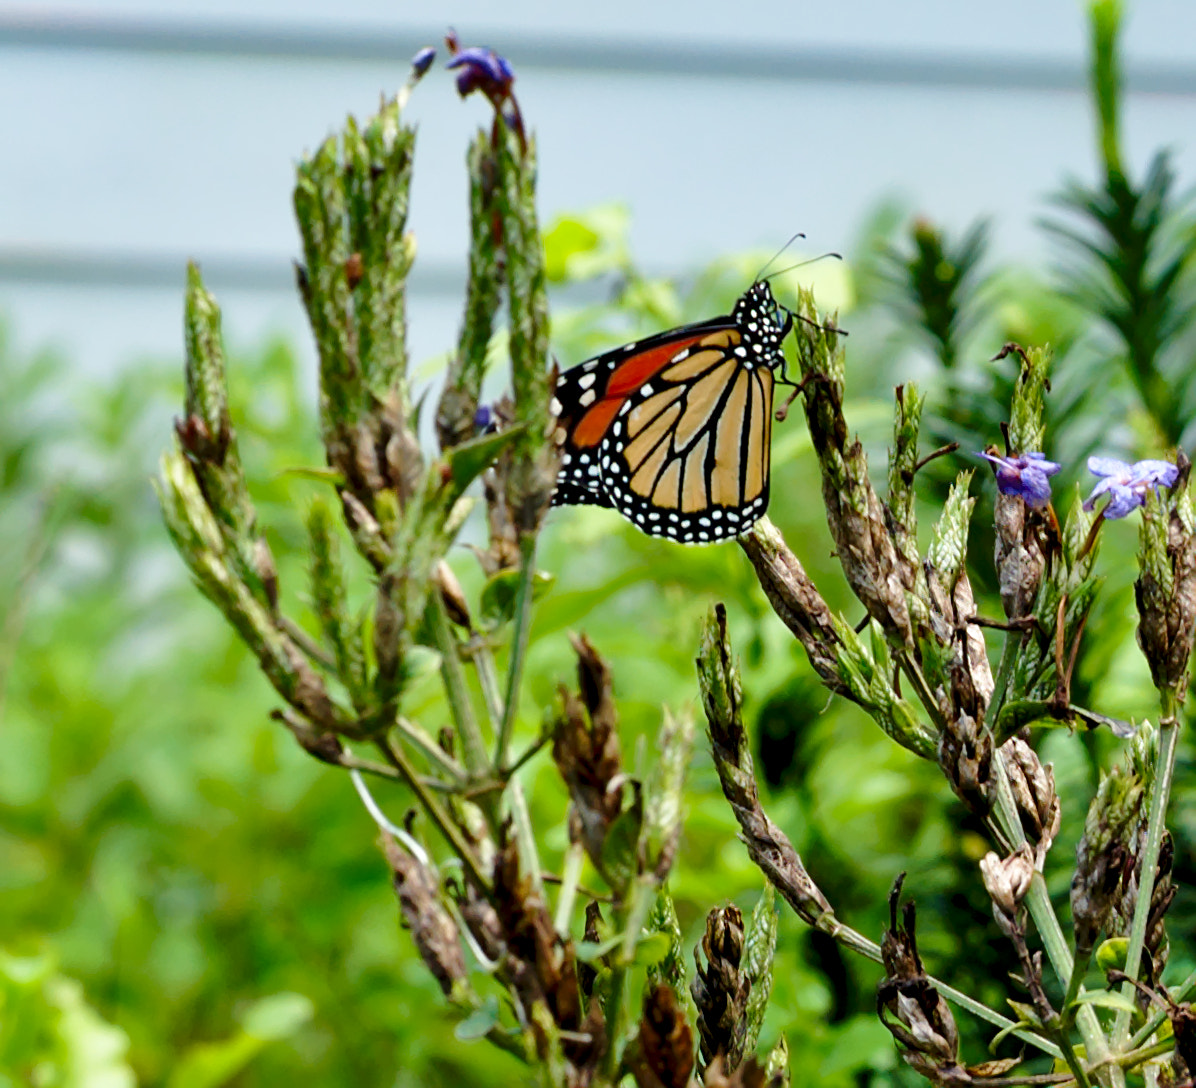 ZEISS Otus 85mm F1.4 sample photo. Another monarch butterfly photography